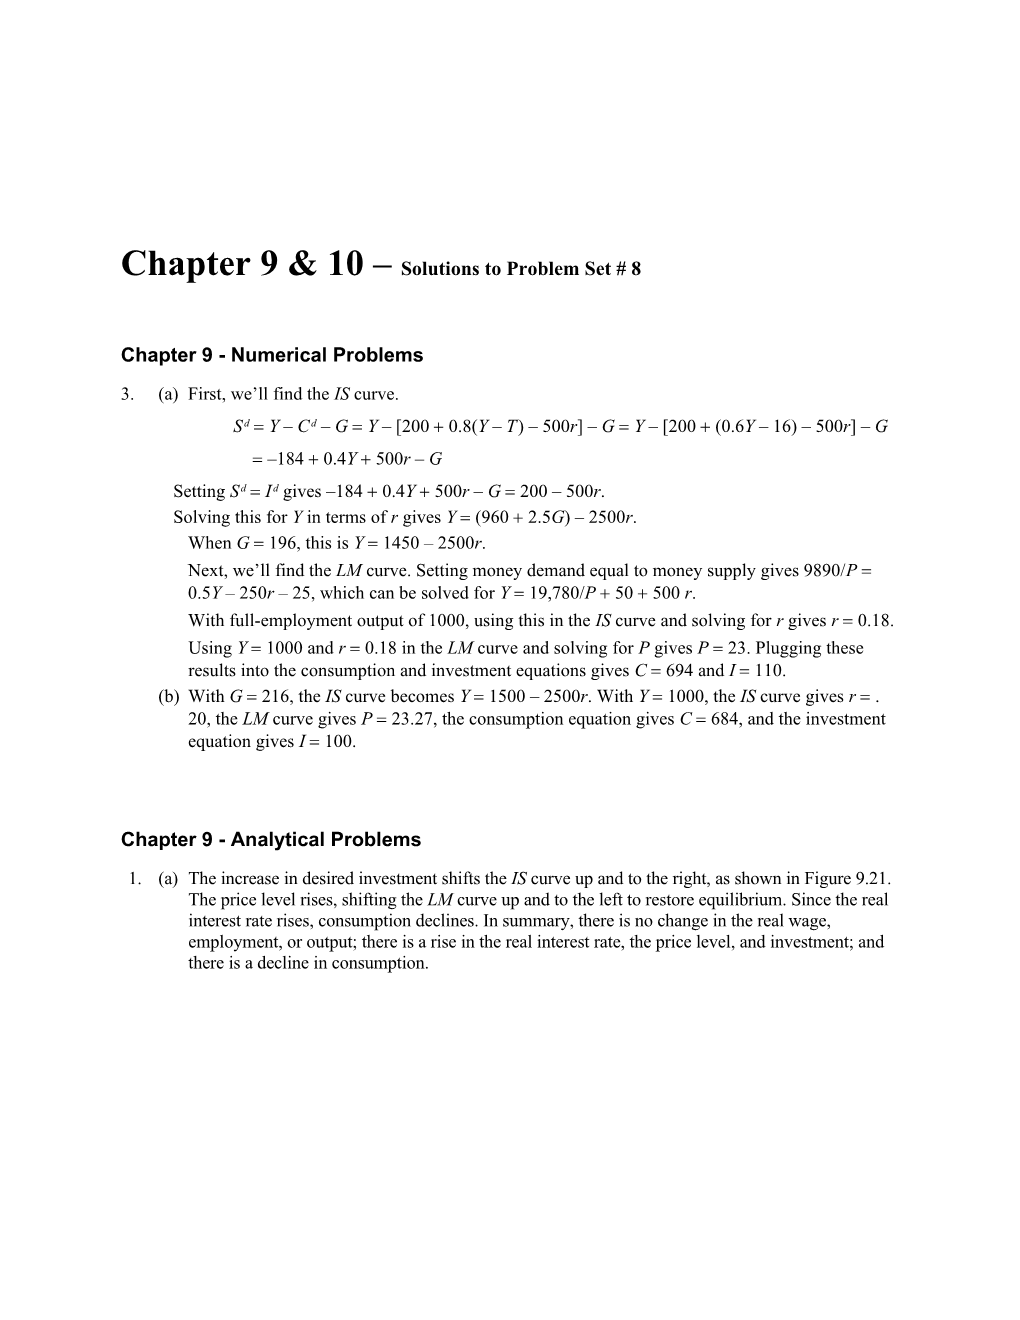 Chapter 9 & 10 Solutions to Problem Set # 8